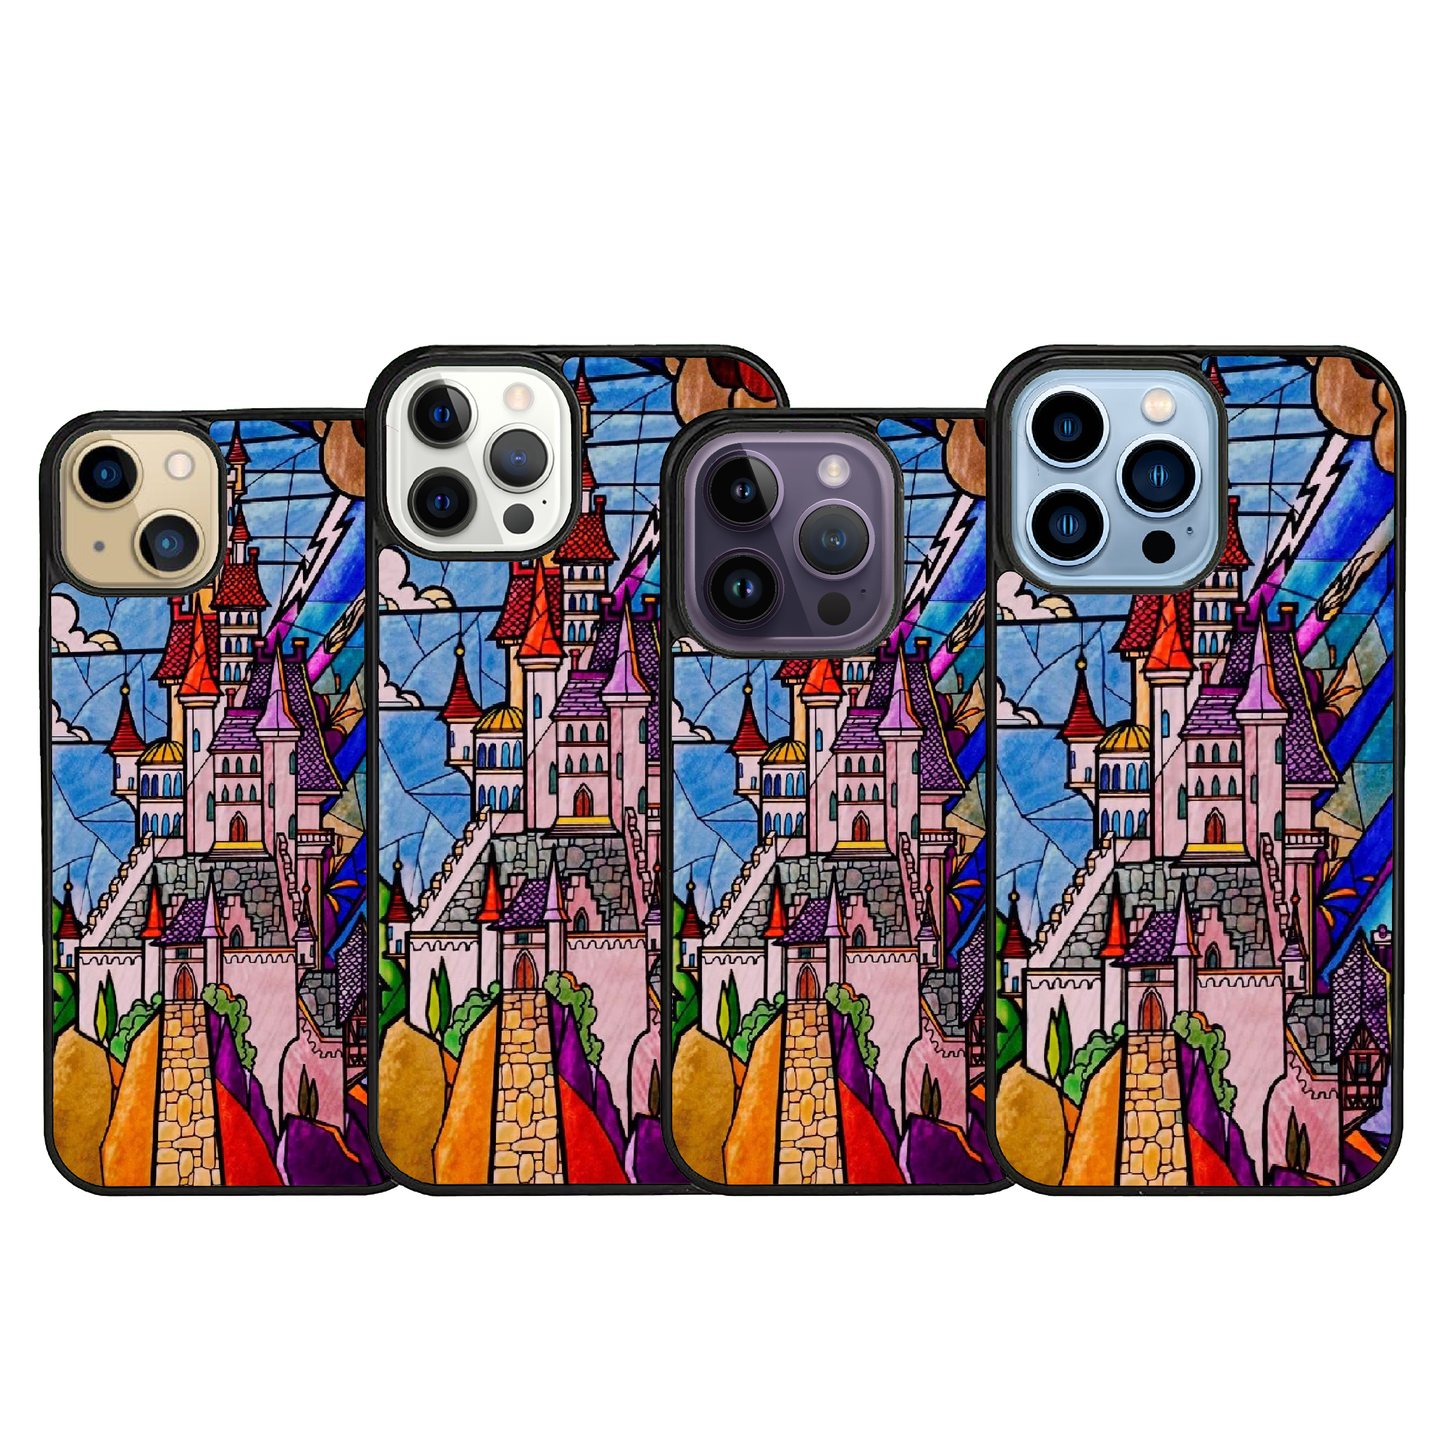 Magical Castle Glass Art iPhone or Galaxy Slim Case